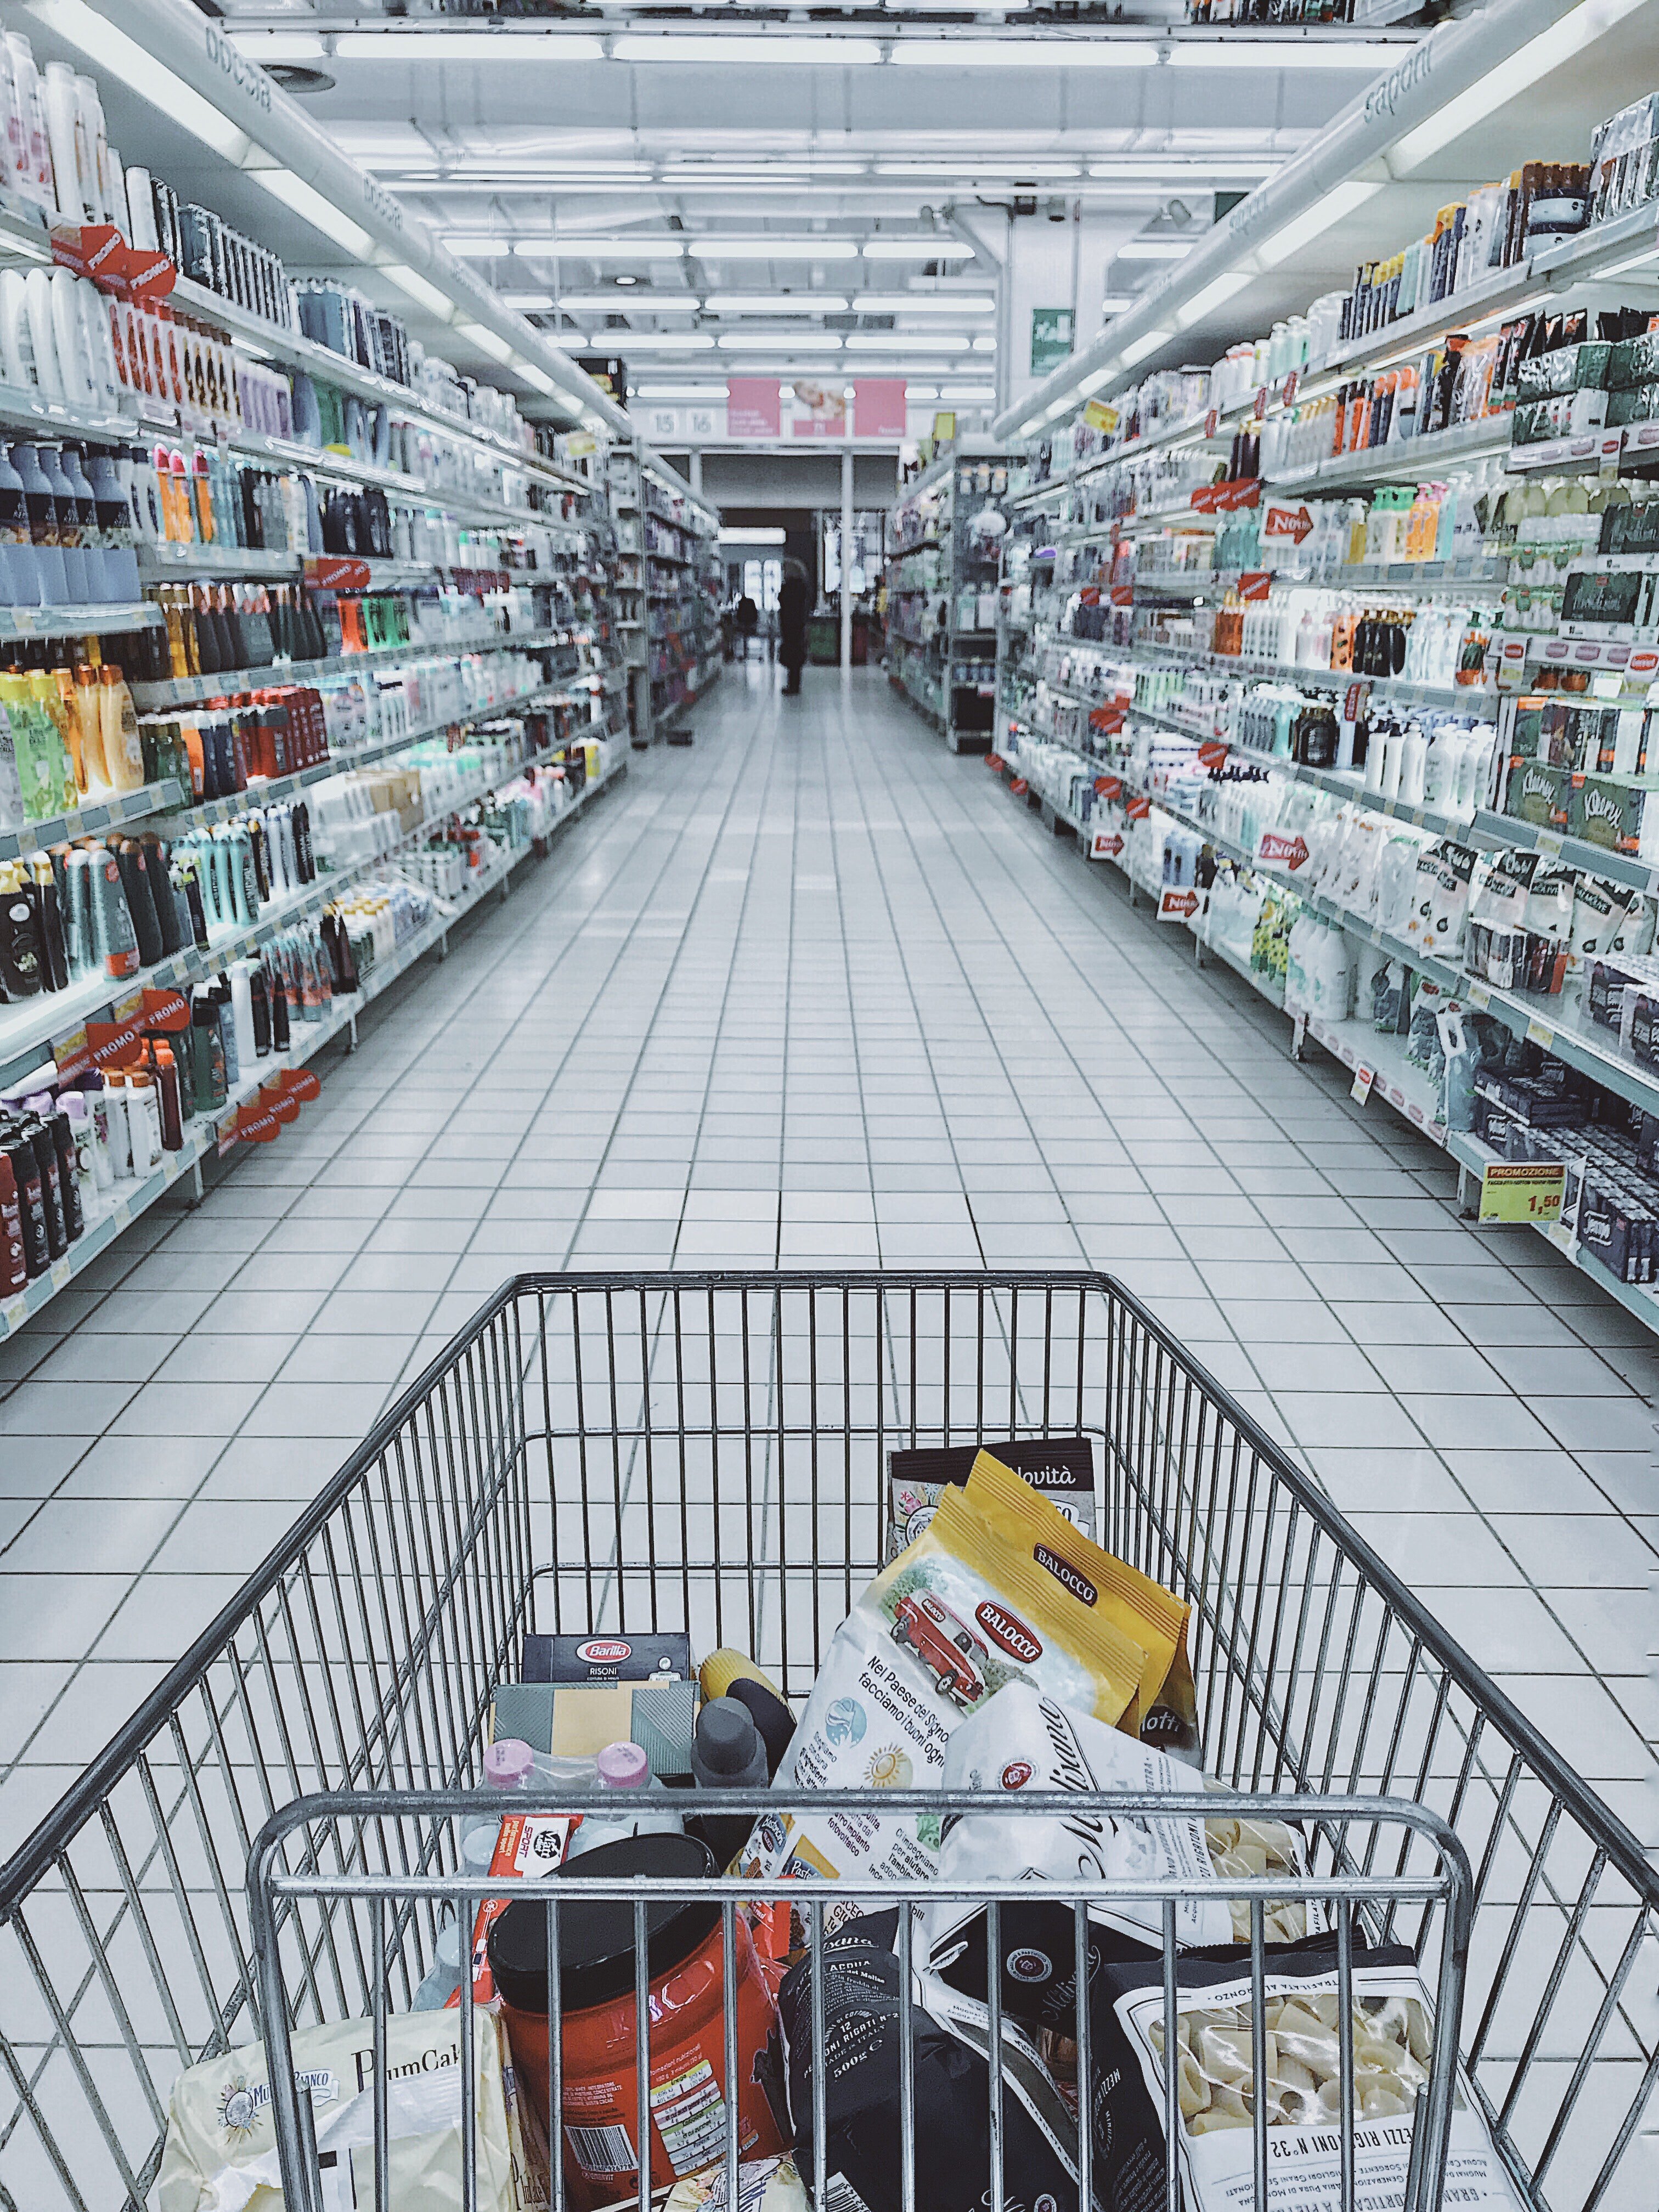 My ex was (supposedly) doing groceries when the entire thing kicked off | Source: Pexels